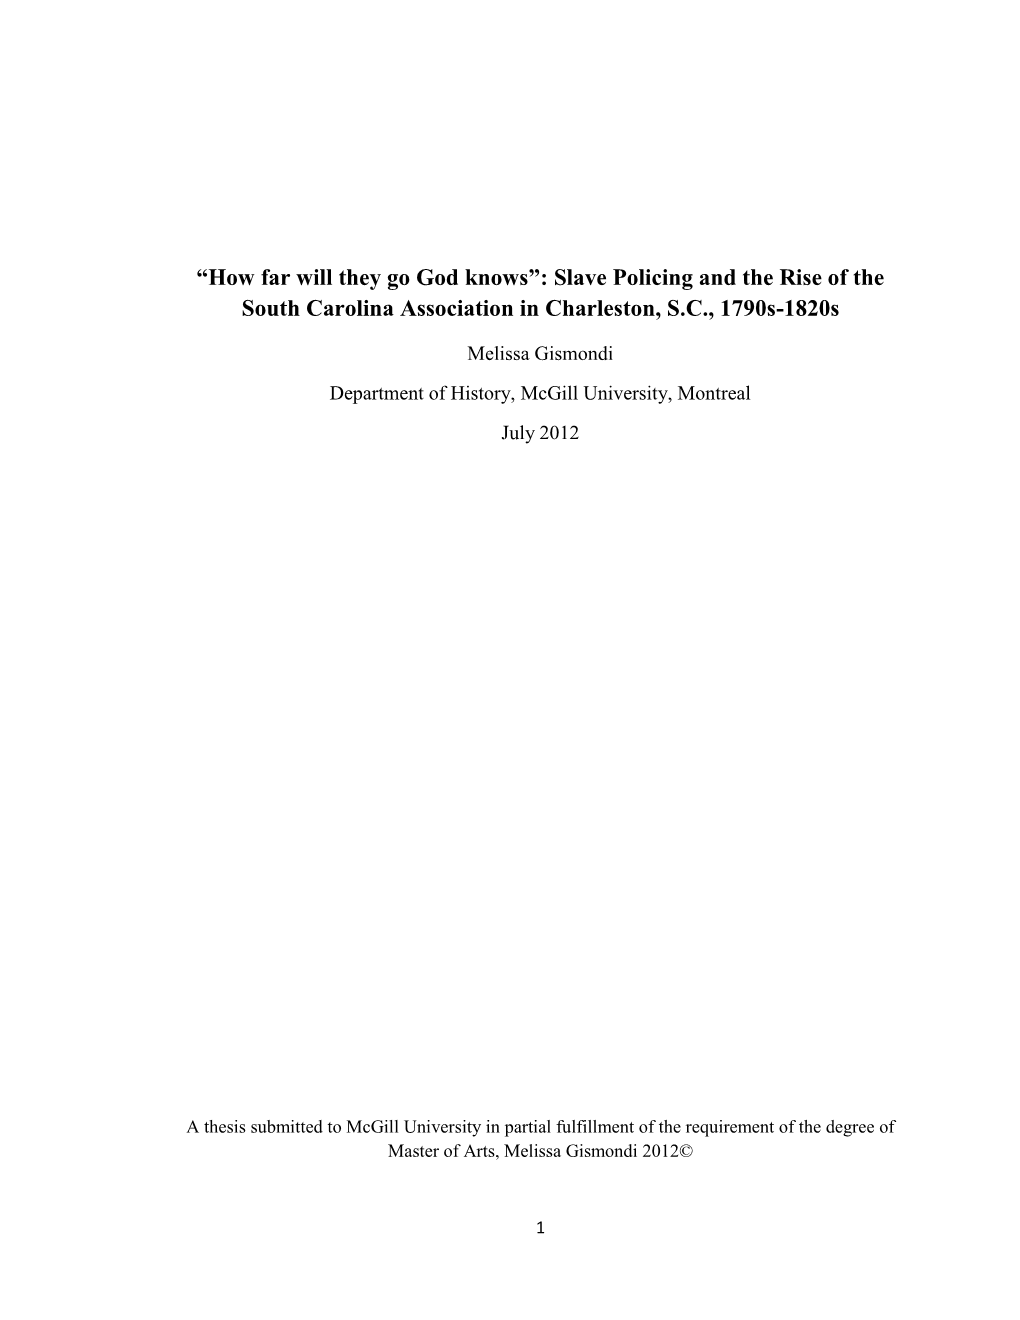 Slave Policing and the Rise of the South Carolina Association in Charleston, S.C., 1790S-1820S